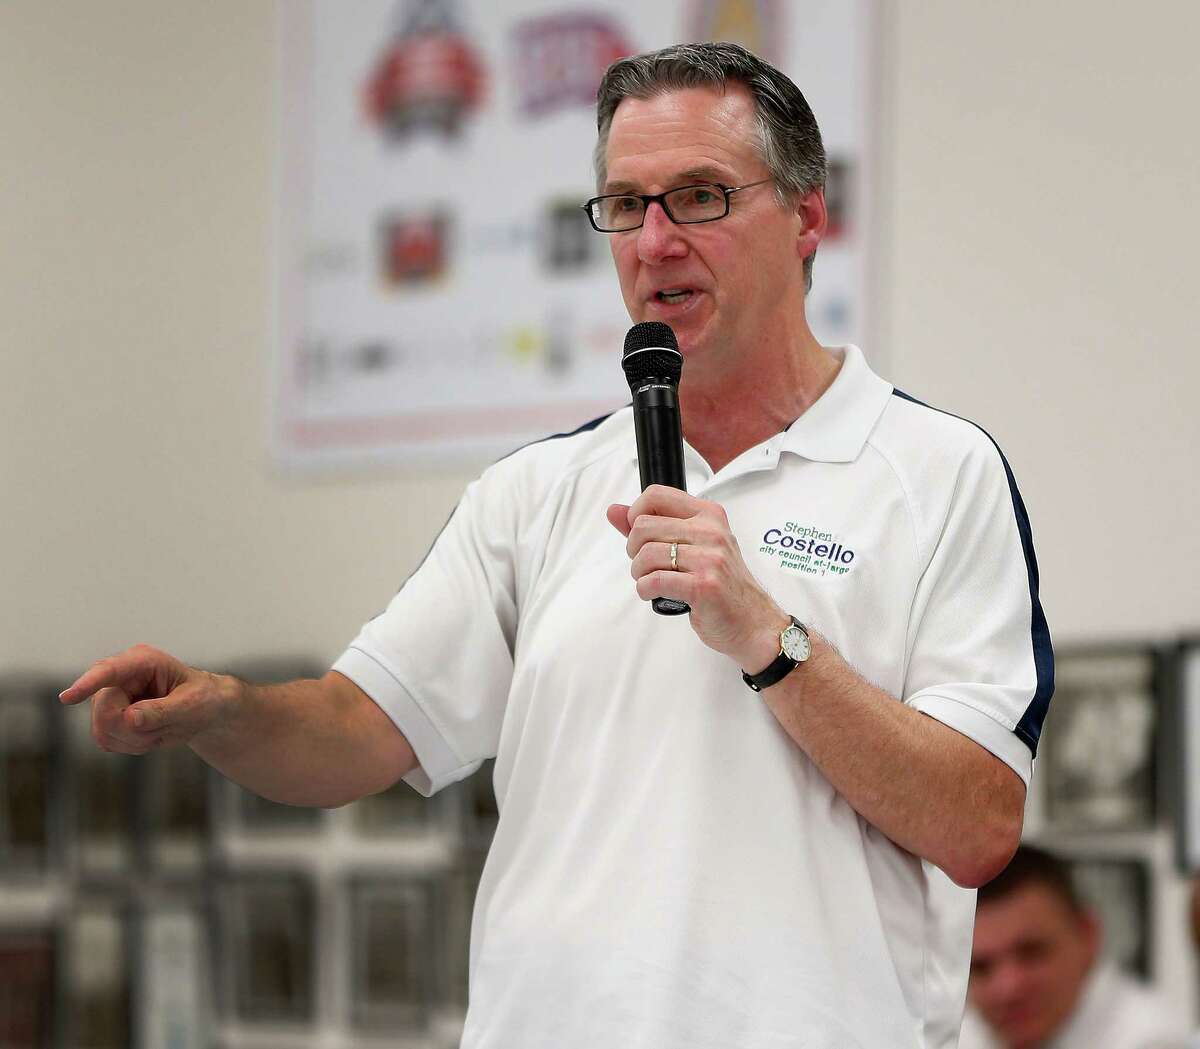 Mayoral candidate Steve Costello speaks during the Houston GLBT Political Caucus at the IBEW Hall, where they picked their slate of mayoral, controller and city council candidates on Saturday, Aug. 8, 2015, in Houston. A large crowd of nearly 300 members, was a traditional caucus-style event, with all of the progressive mayoral candidates present.( Karen Warren / Houston Chronicle )